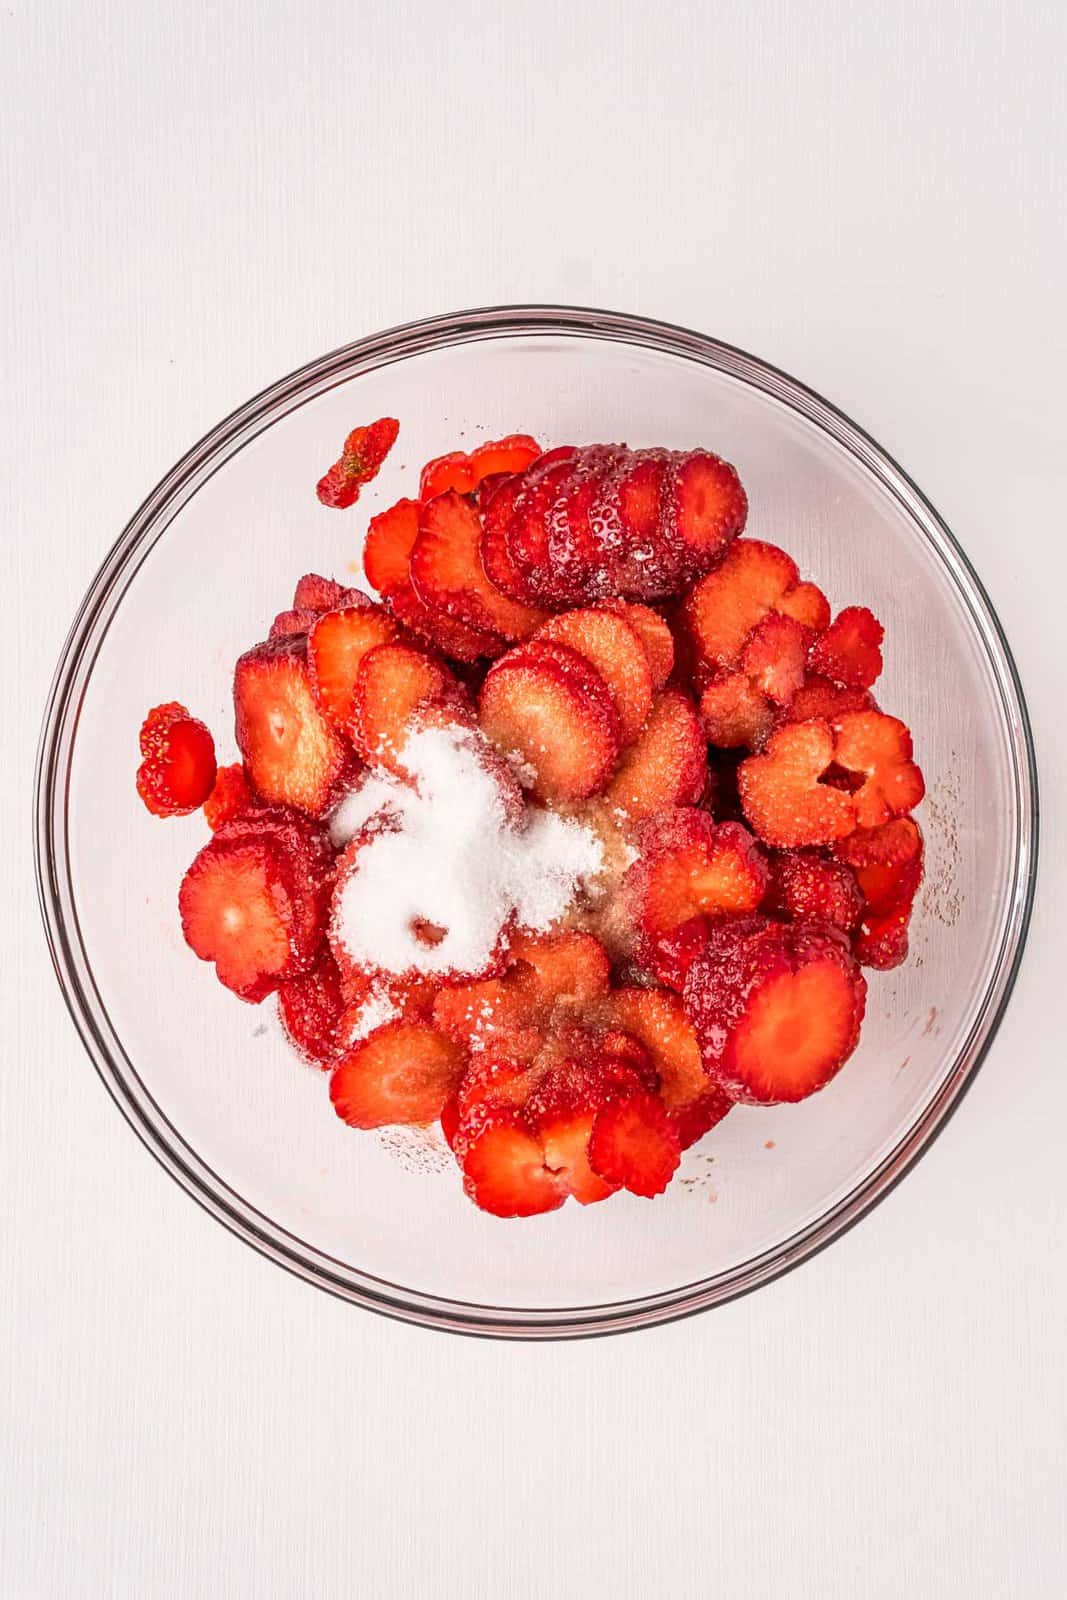 sliced strawberries, sugar and vanilla extract in a glass bowl.